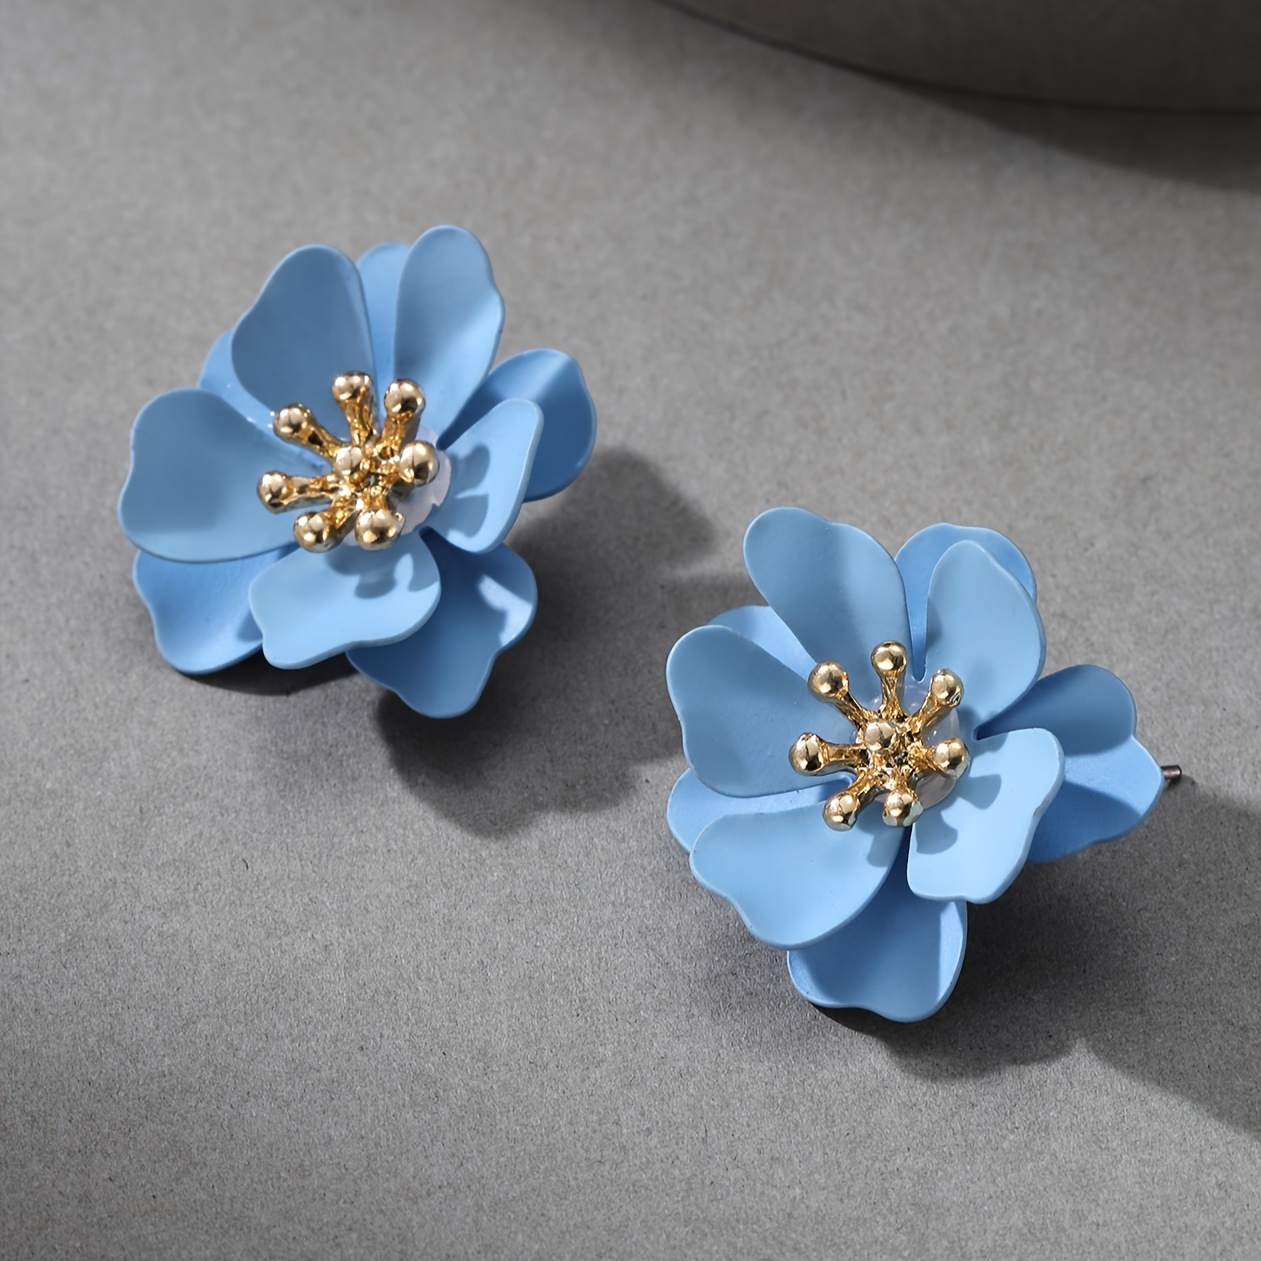 

Elegant And Sweet Floral Earrings For Ladies' Holidays, Birthdays, Dates, Dances, Banquets, Wedding Celebrations, Parties, Vacations Accessories